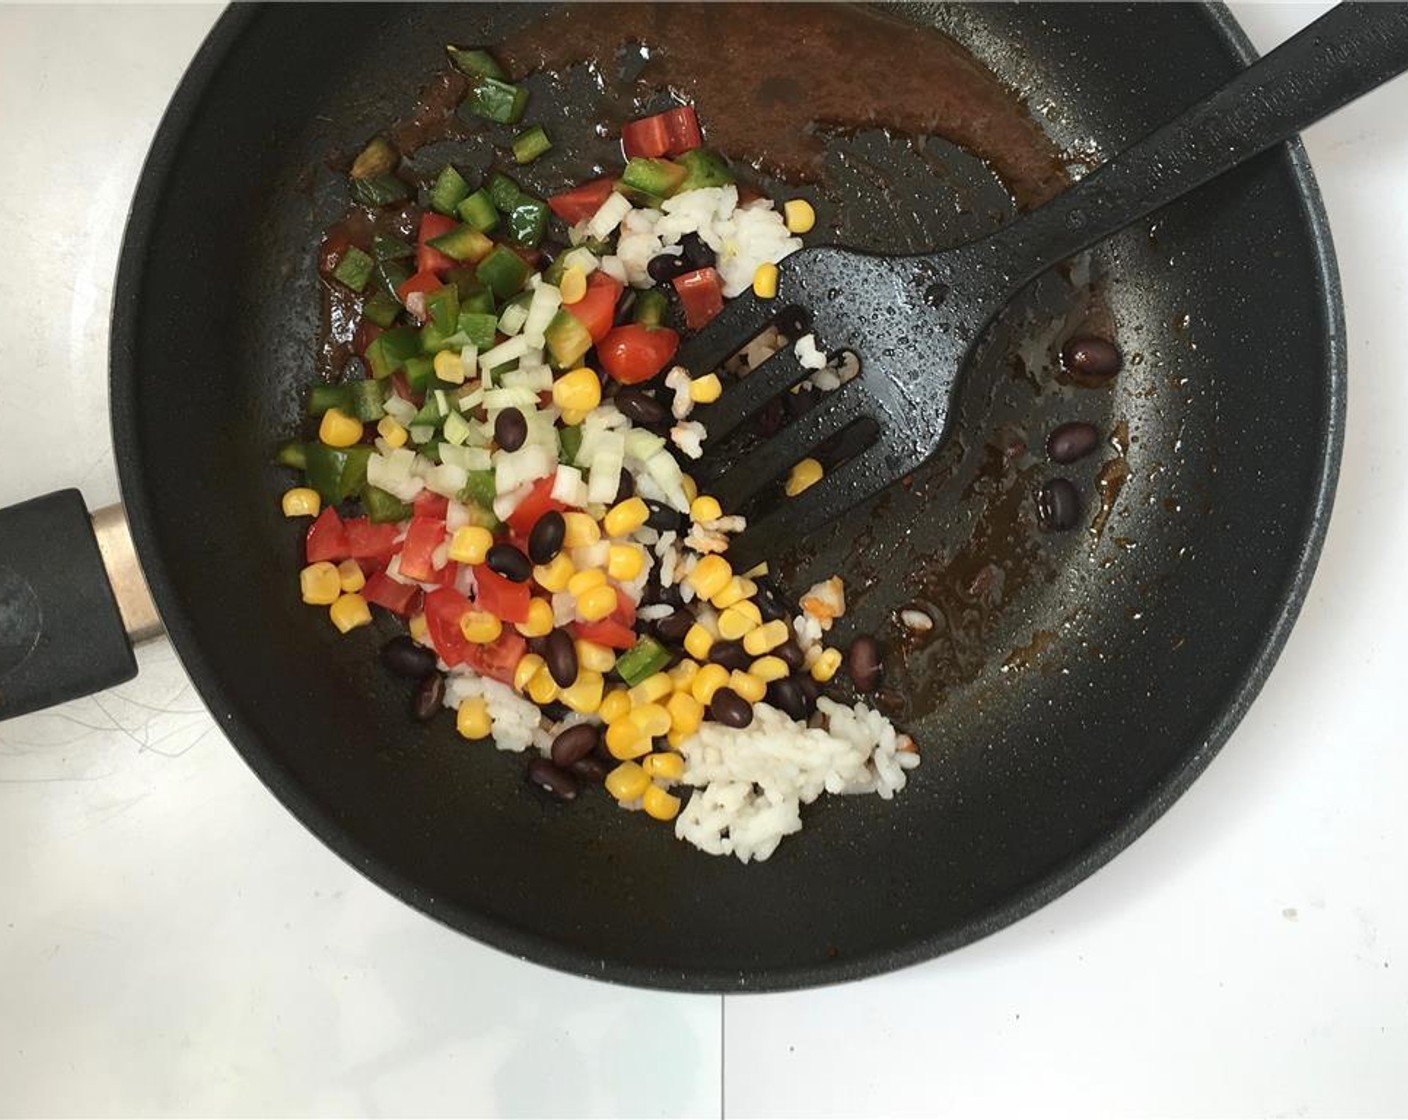 step 5 Stir well and let the tomato paste reduce. Then take the pan off the heat and add the Canned Black Beans (3 Tbsp), Green Bell Peppers (3 Tbsp), Cherry Tomatoes (2), Corn Kernels (2 Tbsp), Onions (2 Tbsp) and cooked White Rice (1 Tbsp).